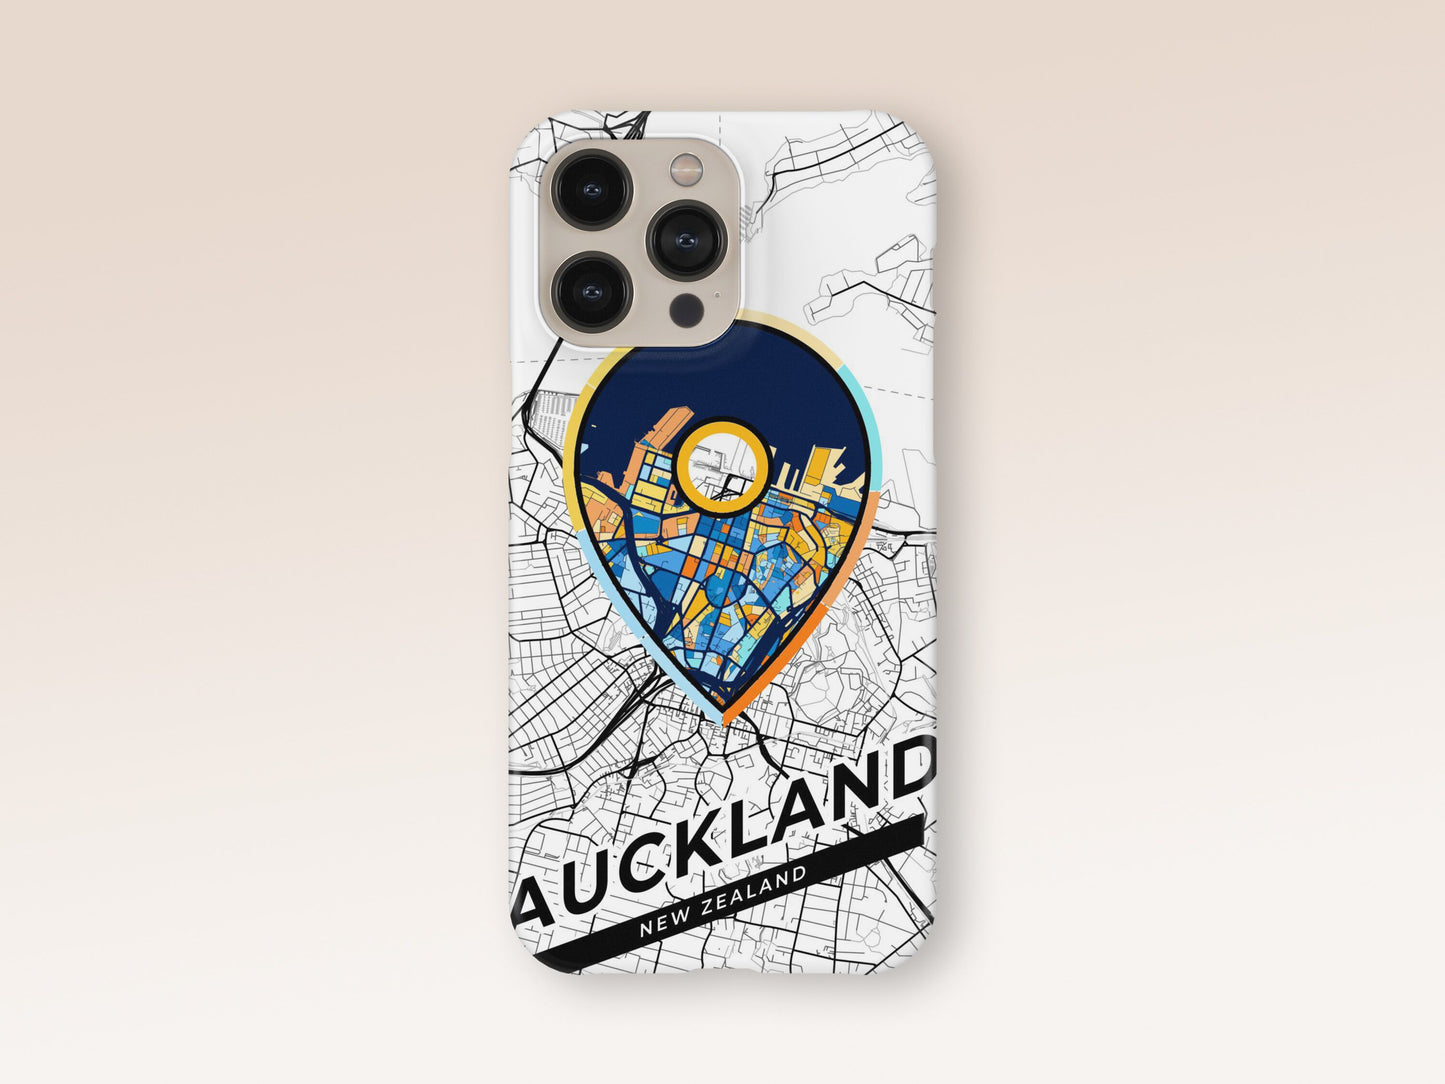 Auckland New Zealand slim phone case with colorful icon. Birthday, wedding or housewarming gift. Couple match cases. 1